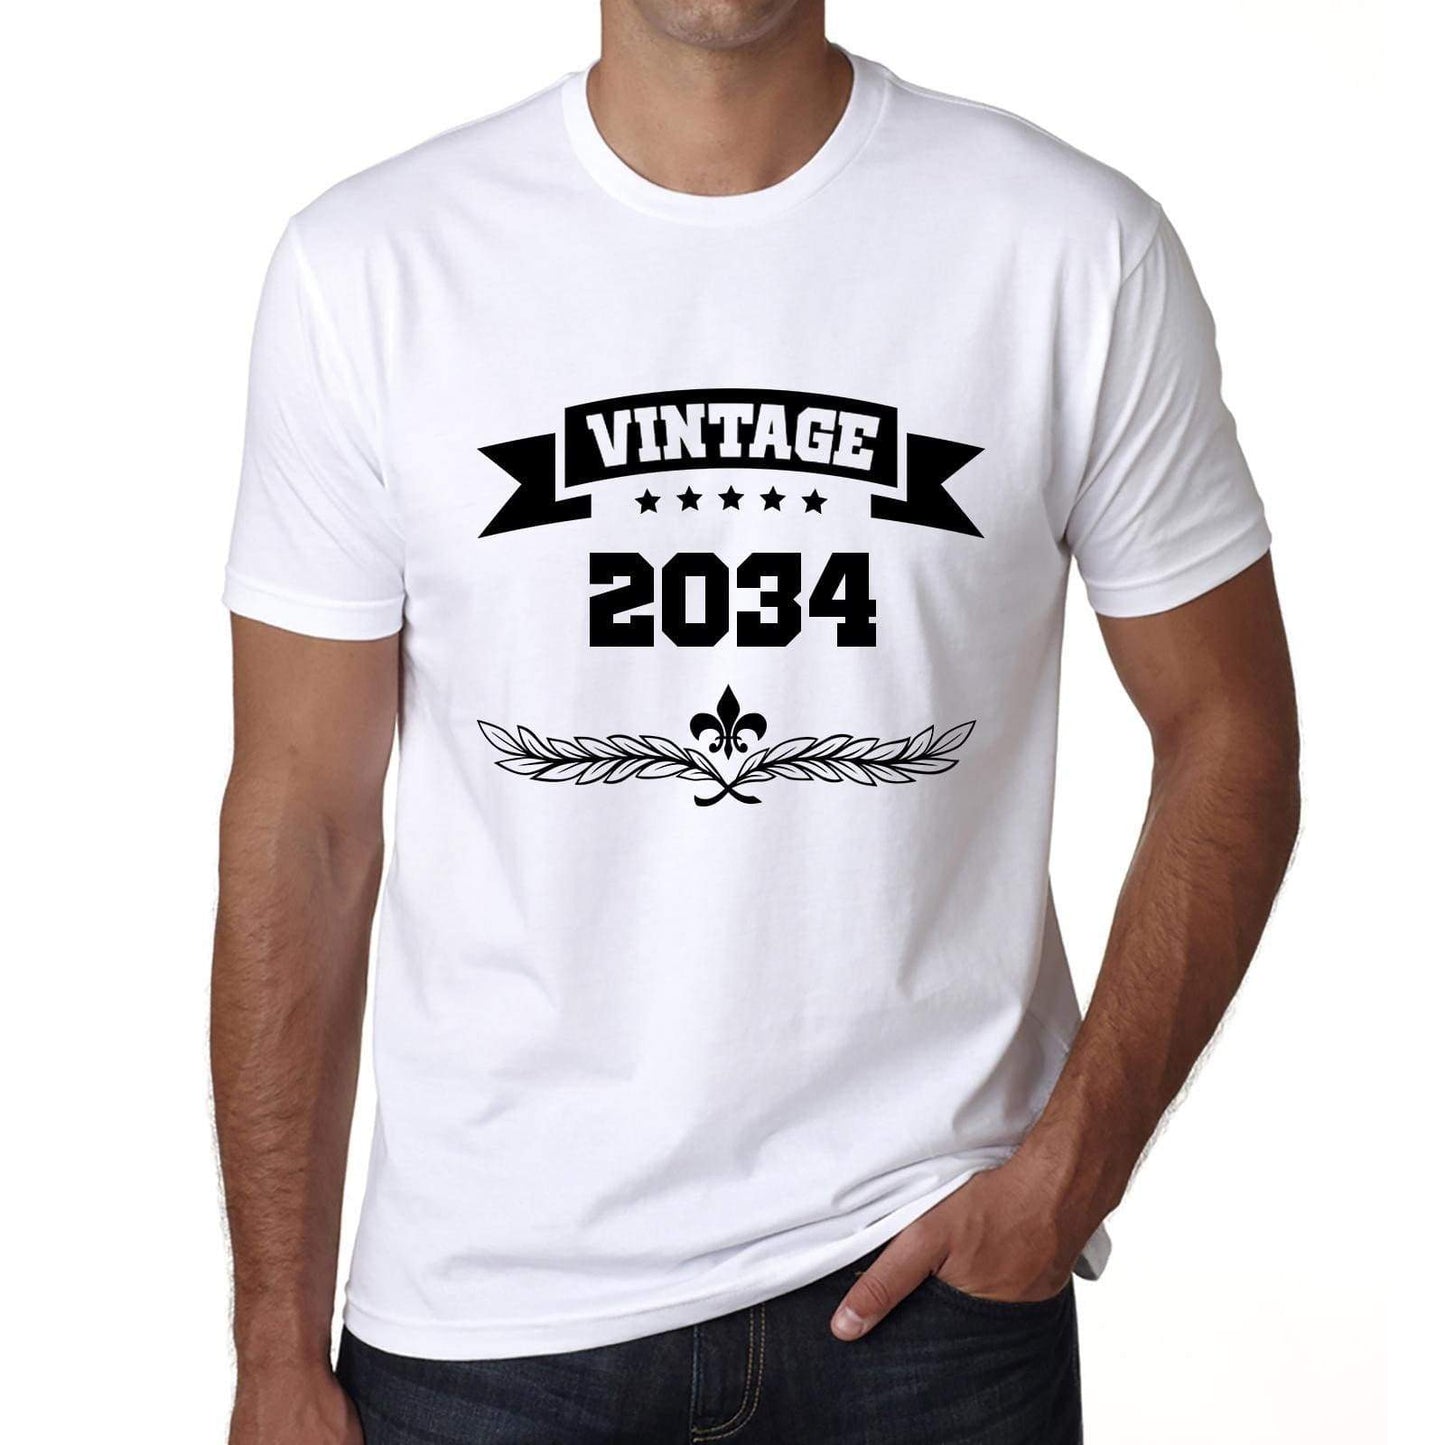 2034 Vintage Year White Mens Short Sleeve Round Neck T-Shirt 00096 - White / S - Casual